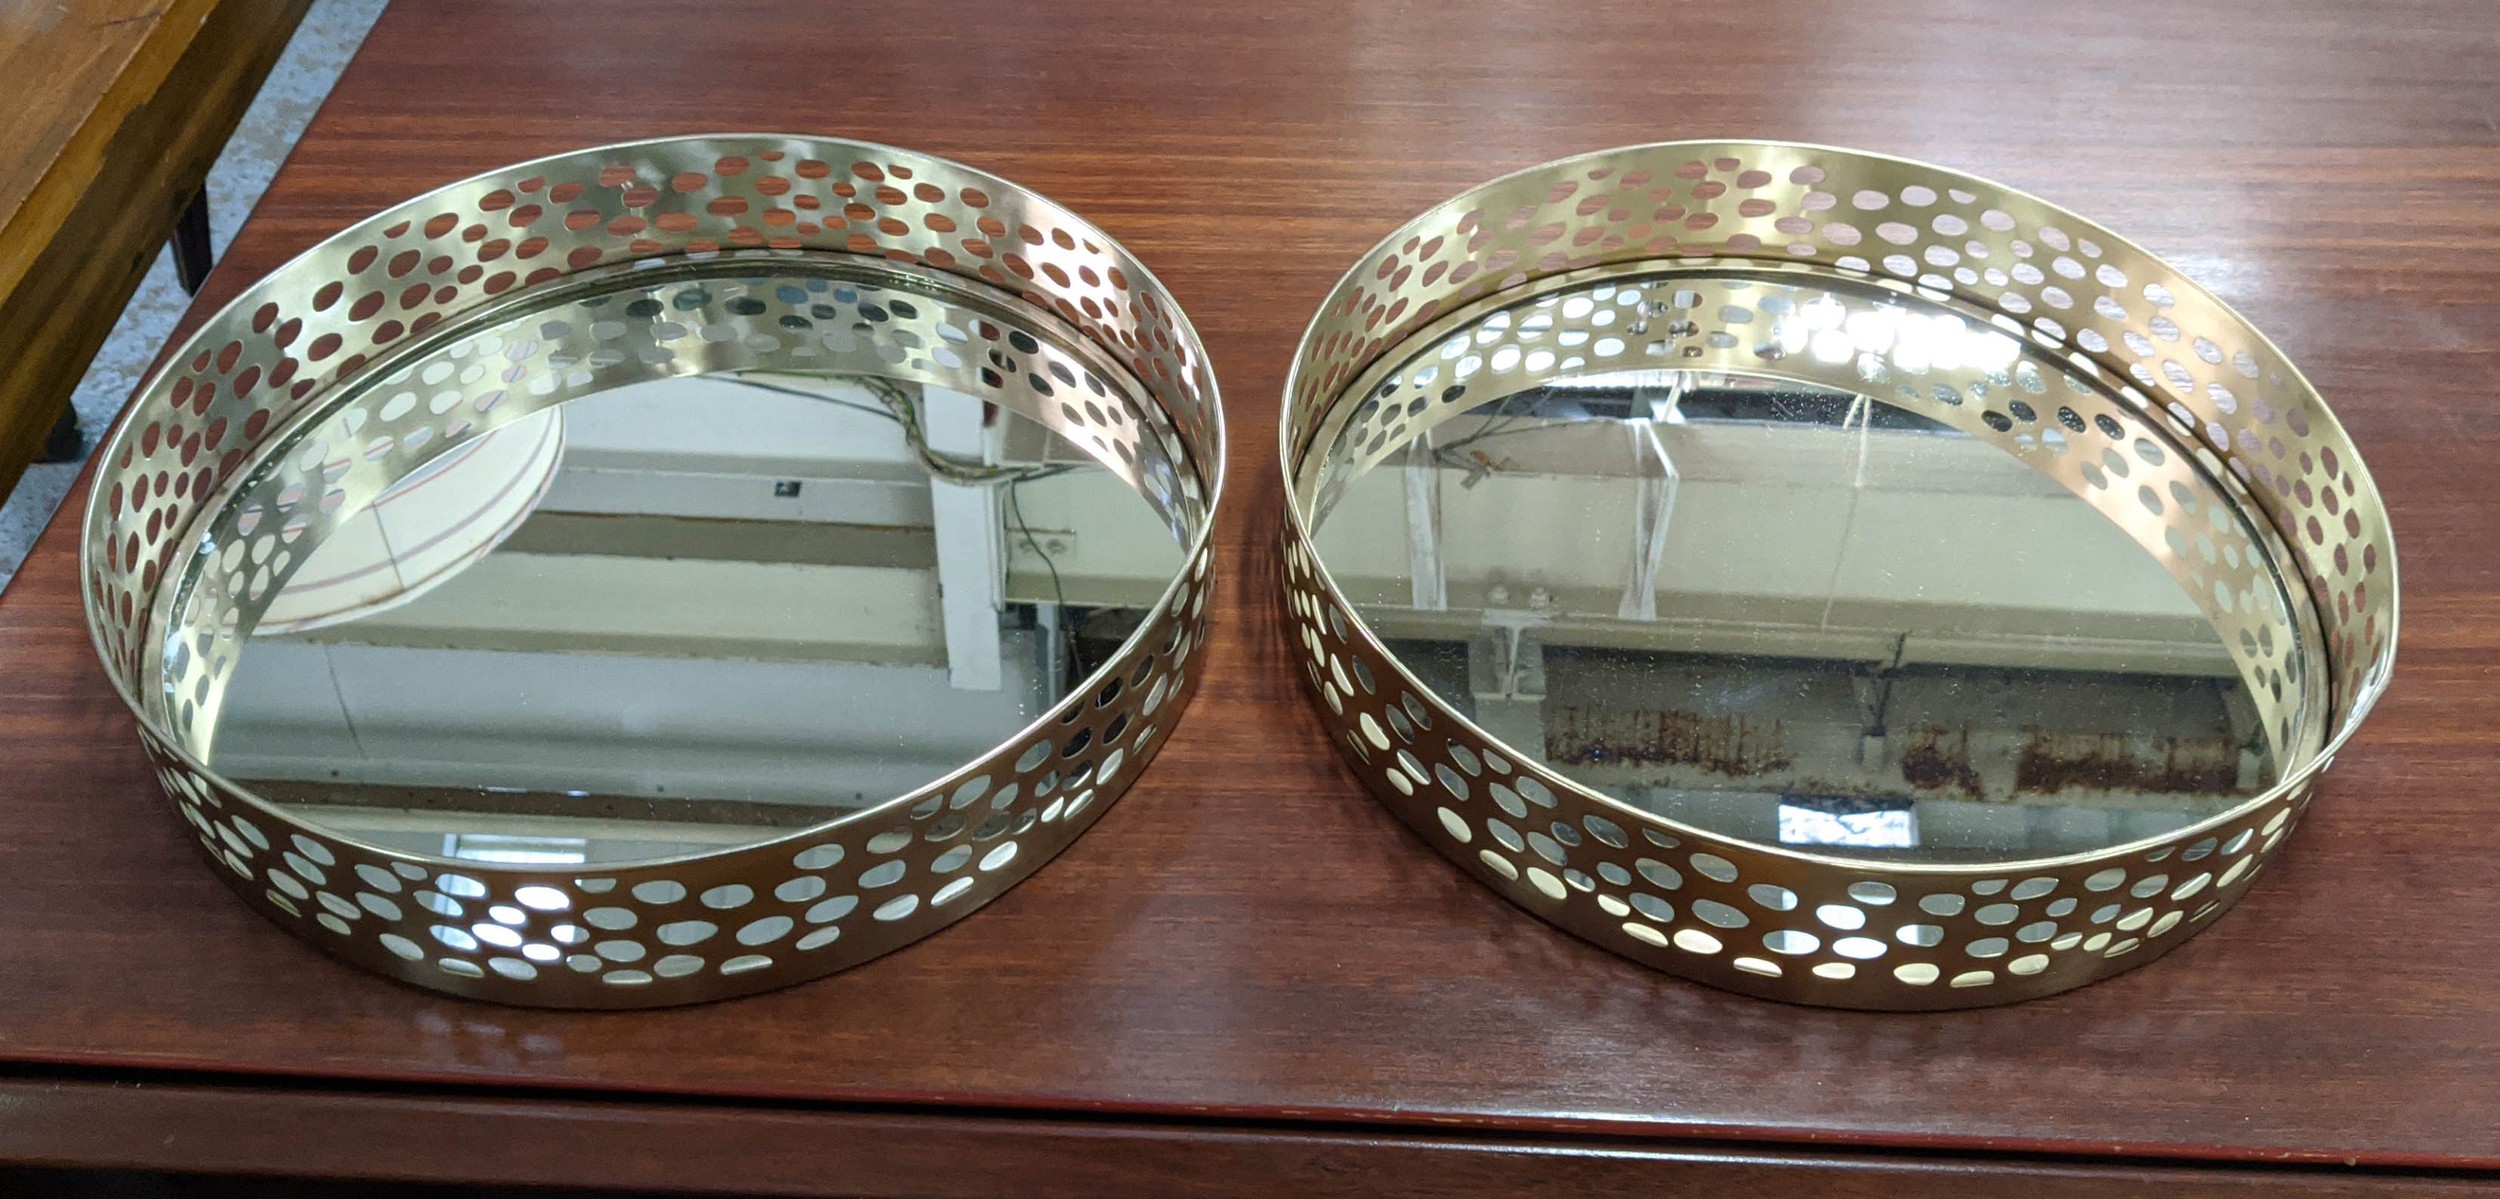 COCKTAIL TRAYS, a pair, 1970s Italian style, gilt finish with mirror 41cm x 41cm x 8cm. (2) - Image 2 of 4